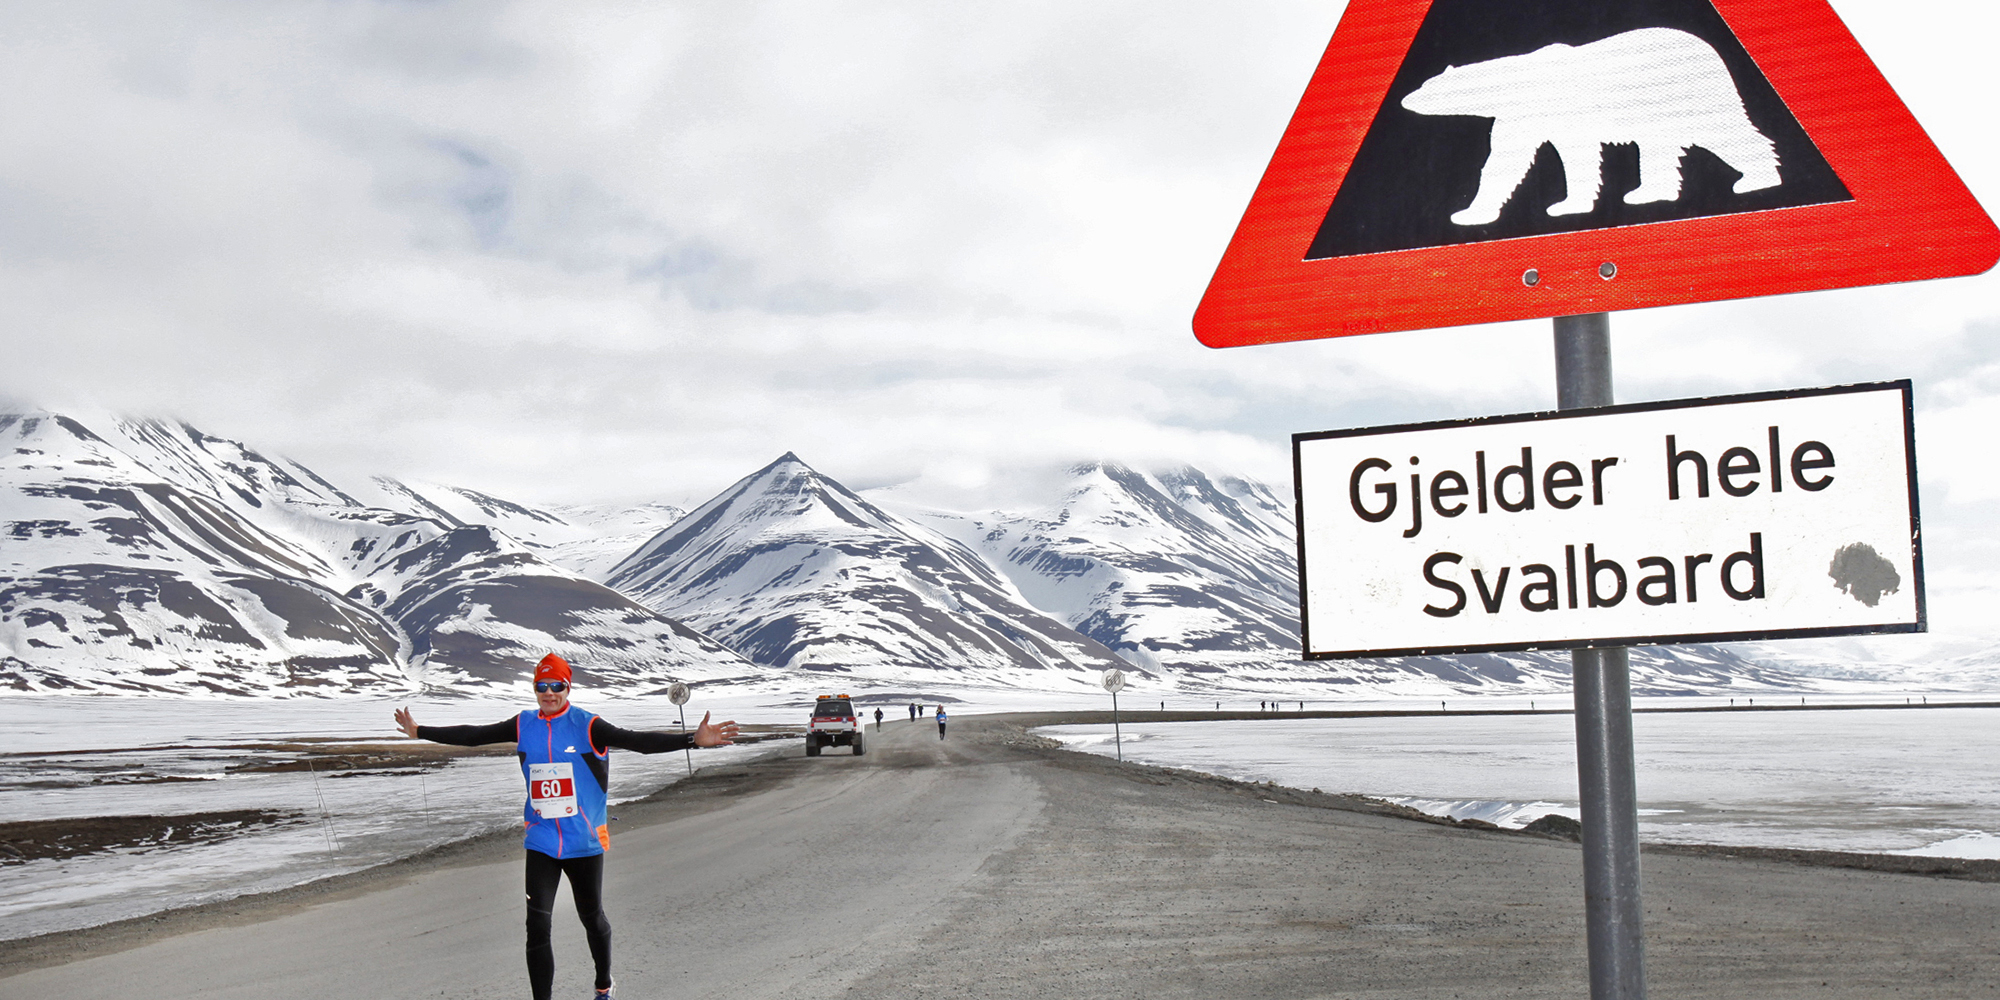 Marathon Flame in Norway, AIMS